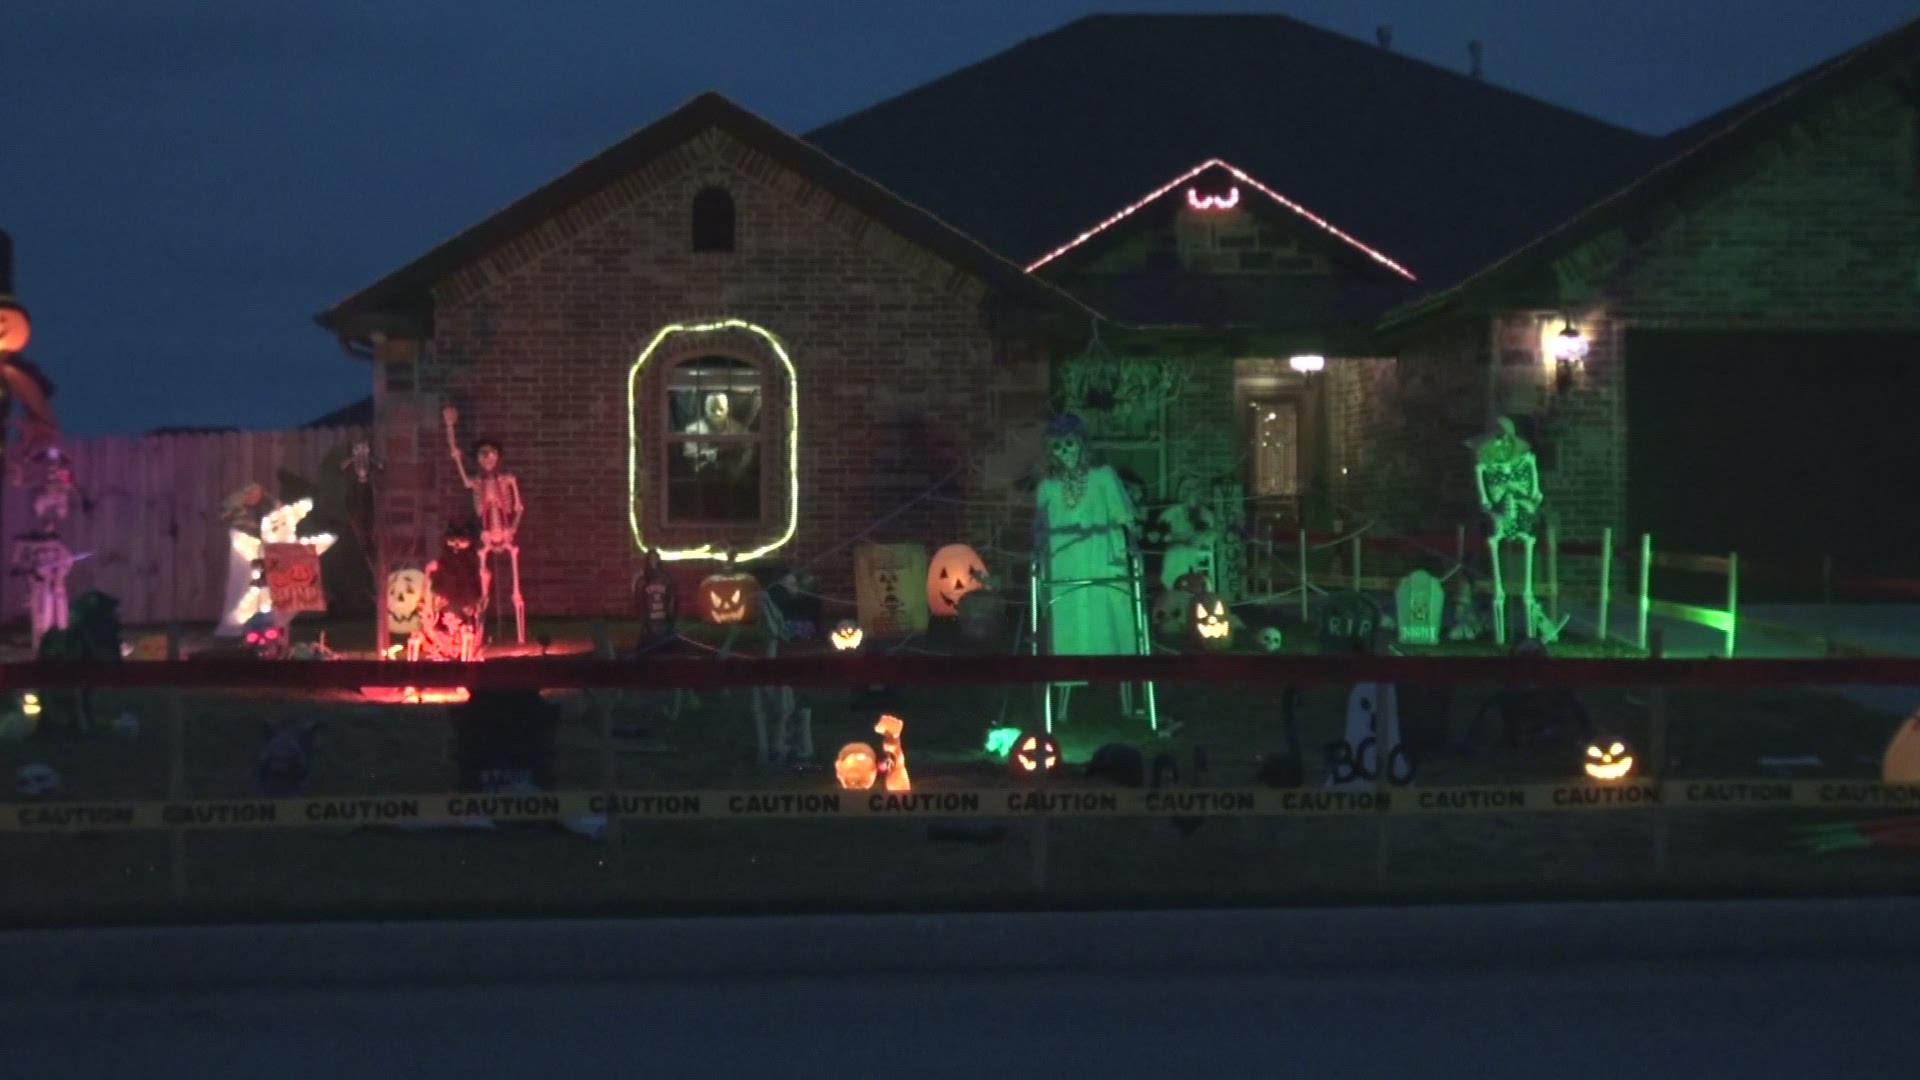 The Elkins family home is one of the best Halloween attractions in Northwest Arkansas.